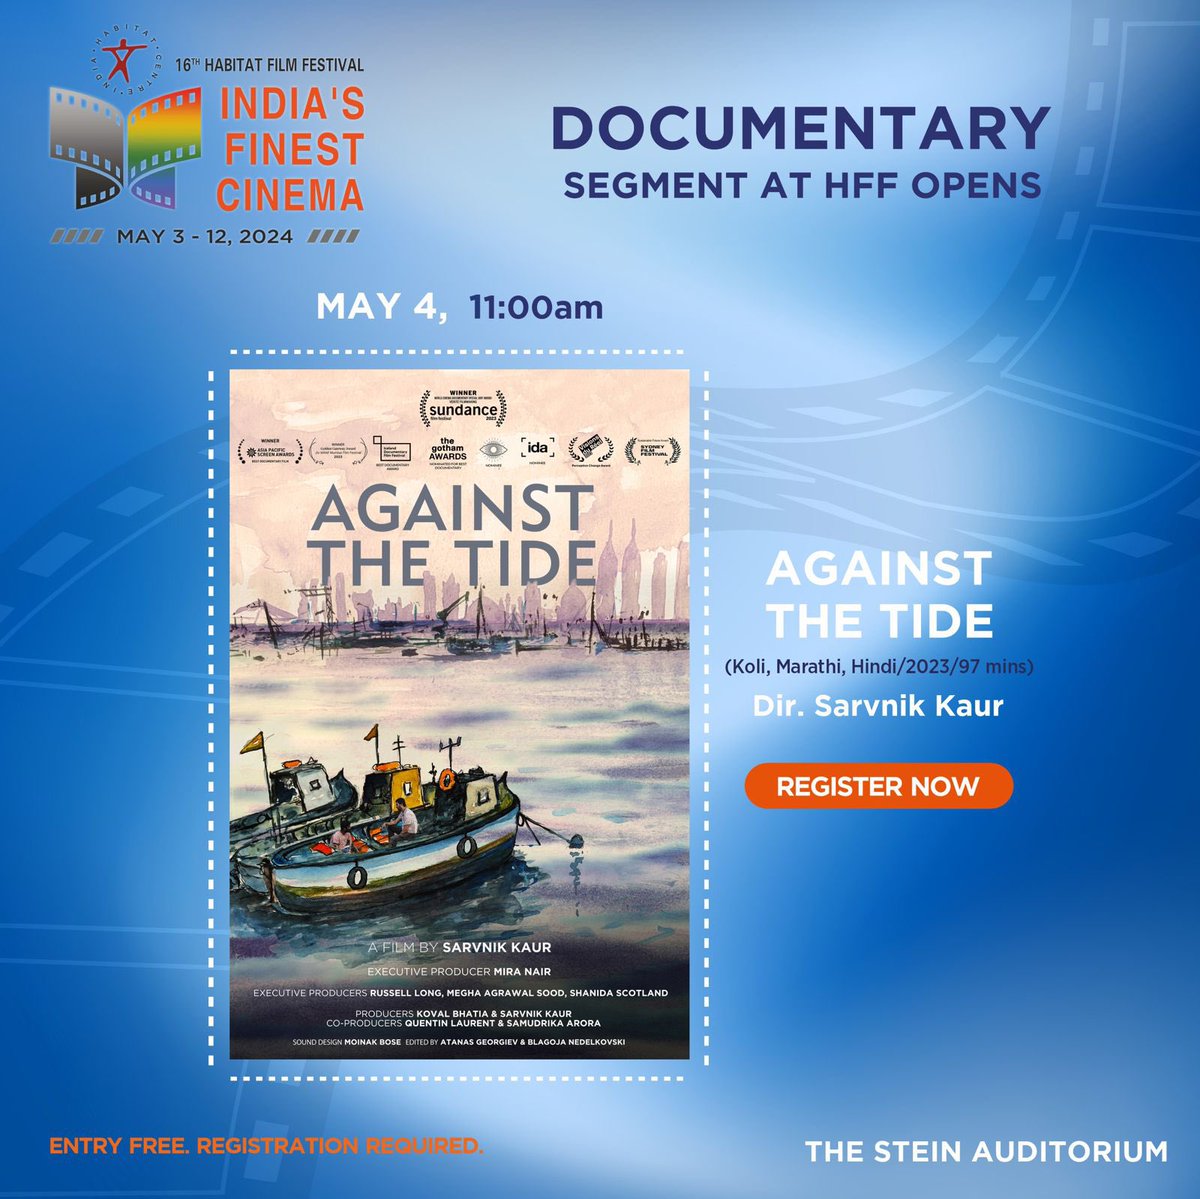 The documentary segment at HFF 2024 presents a robust lineup of non-fiction films, opening with the award-winning documentary 'Against the Tide,' directed by Sarvanik Kaur, on 4th May. It follows two indigenous Koli fishermen in Bombay driven to desperation by a dying sea. Their…